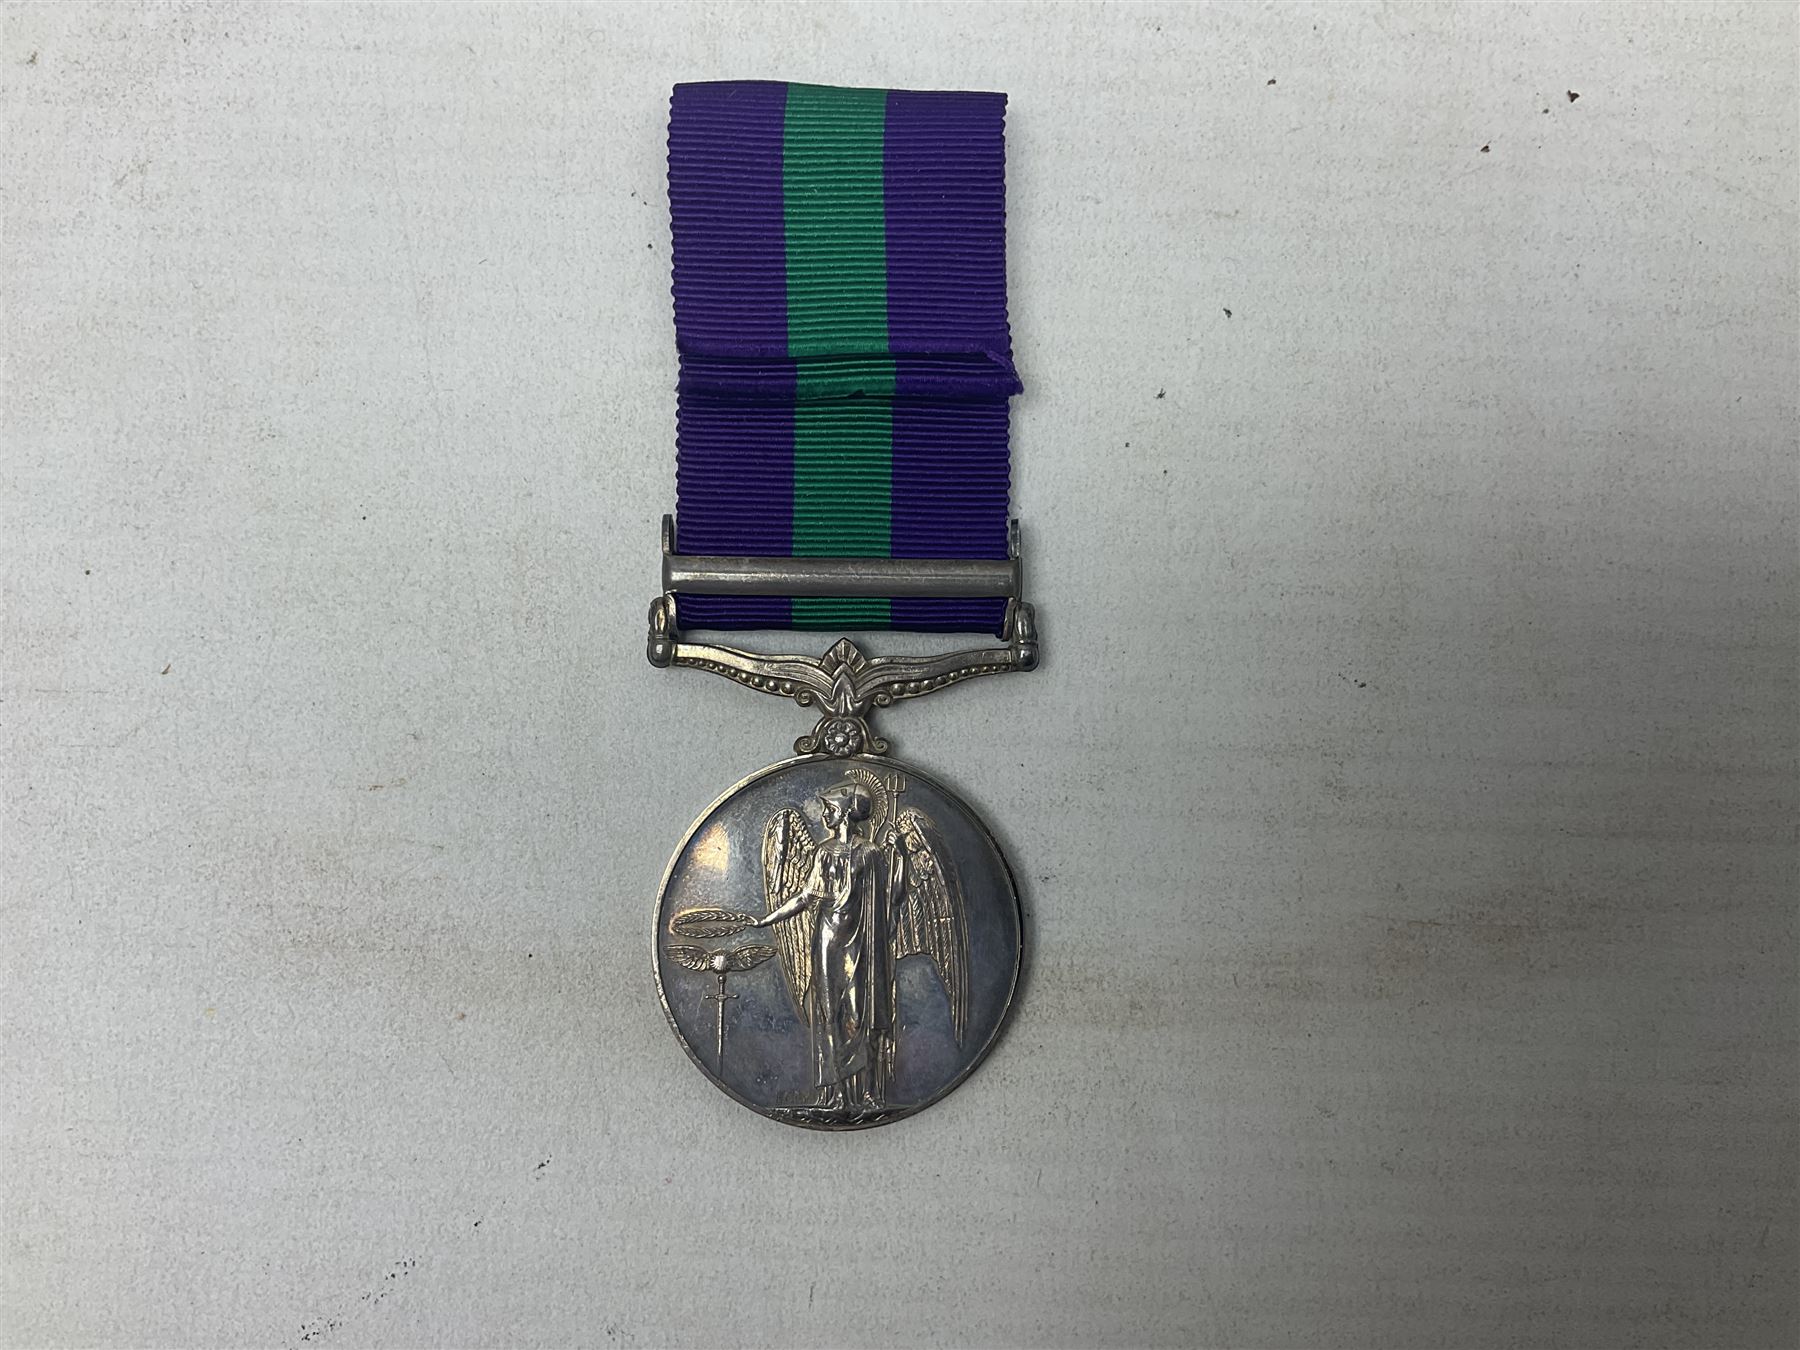 George VI General Service Medal with Palestine 1945-48 clasp awarded to 19117460 Pte. P. Tilmouth R. - Image 4 of 8